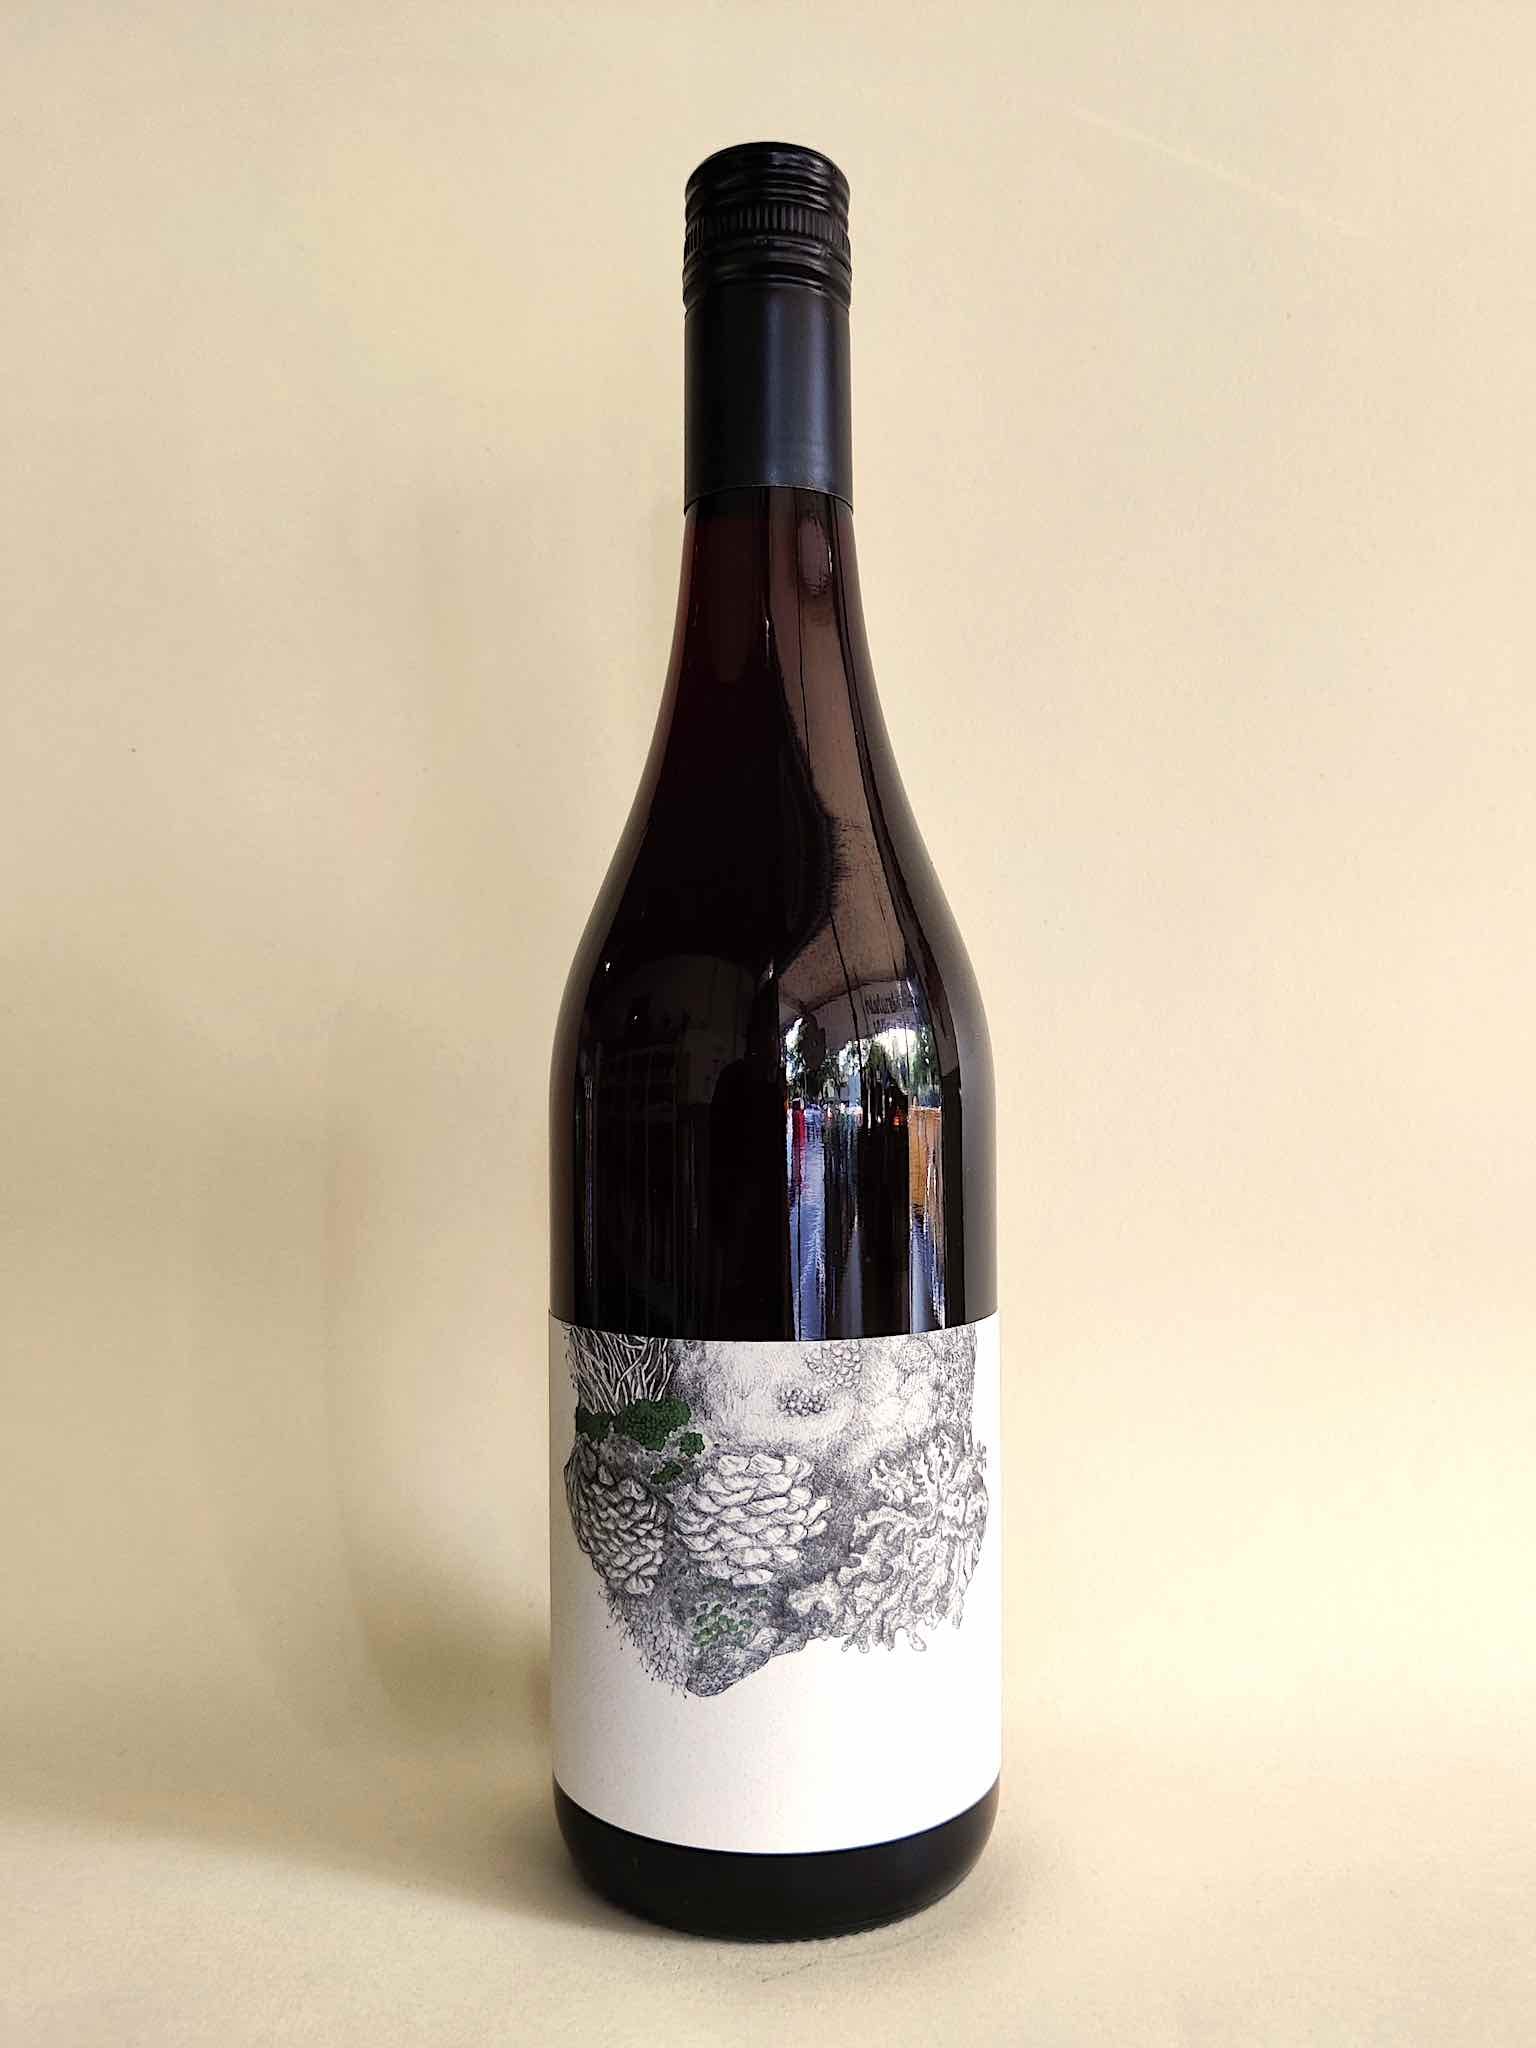 A 750ml bottle of Fleet Wines Syrah from the Yarra Valley, Victoria. 